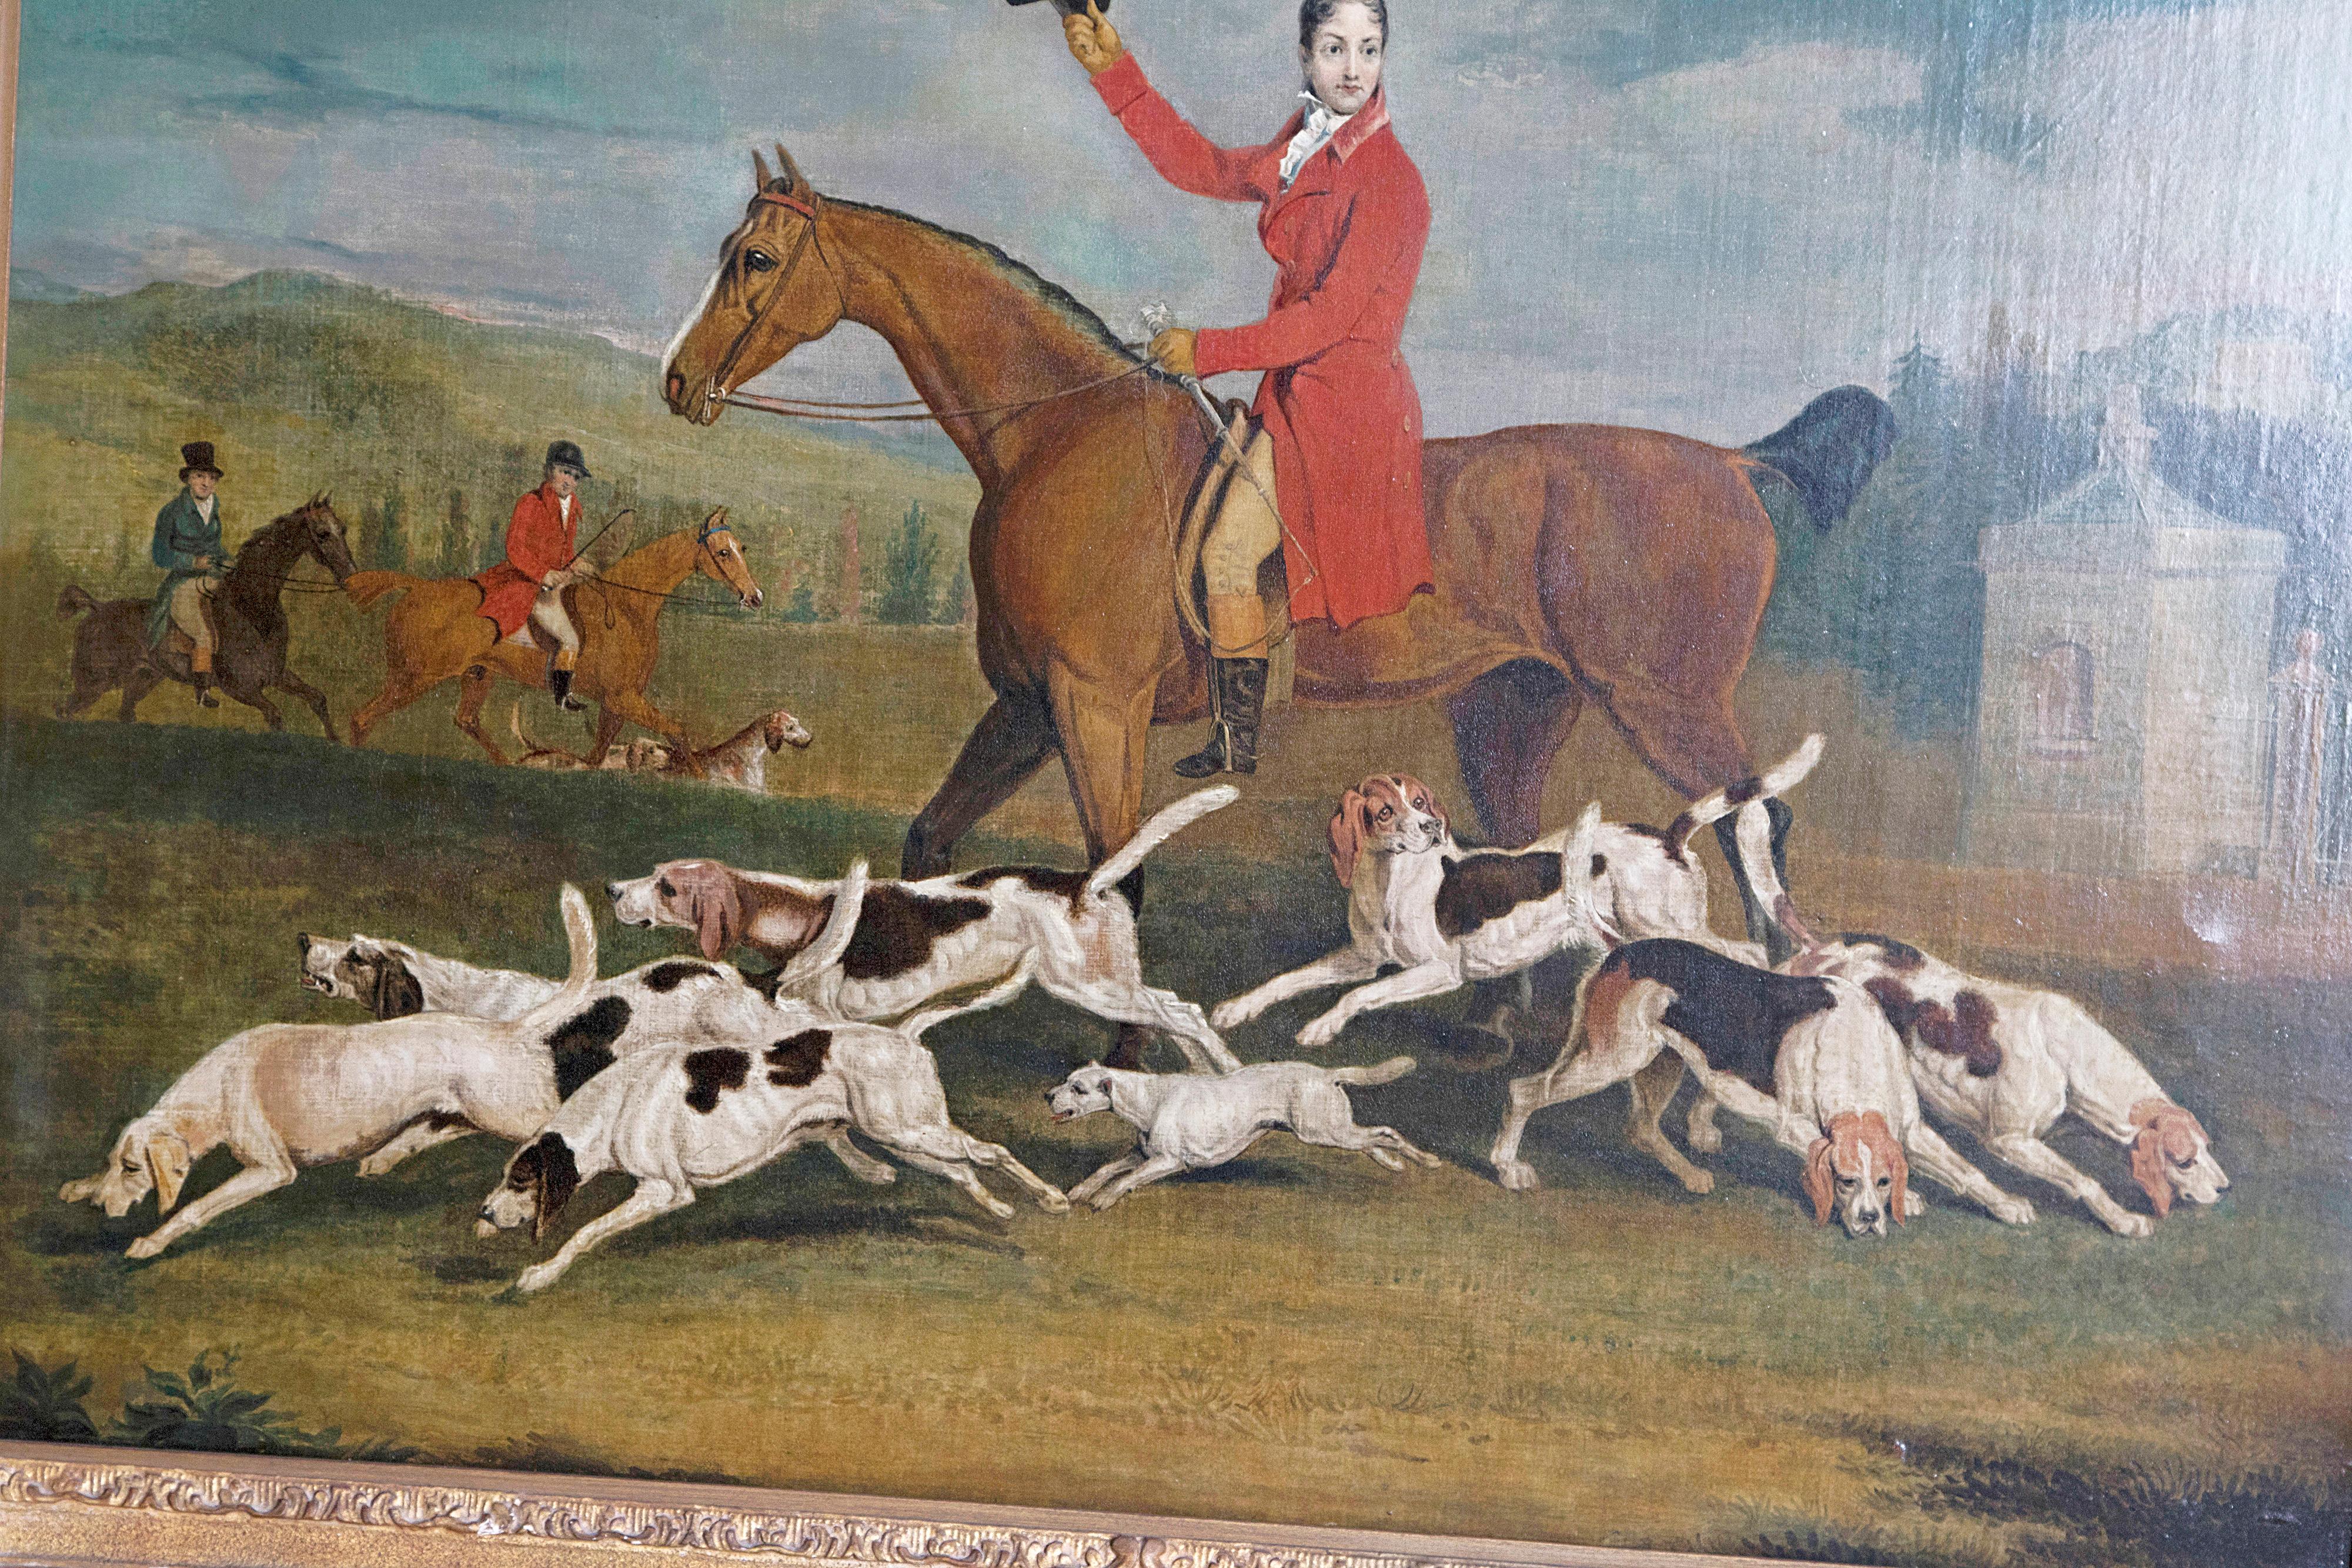 Regency 19th Century Oil on Canvas English Hunting Scene of Rider on Horse with Hounds